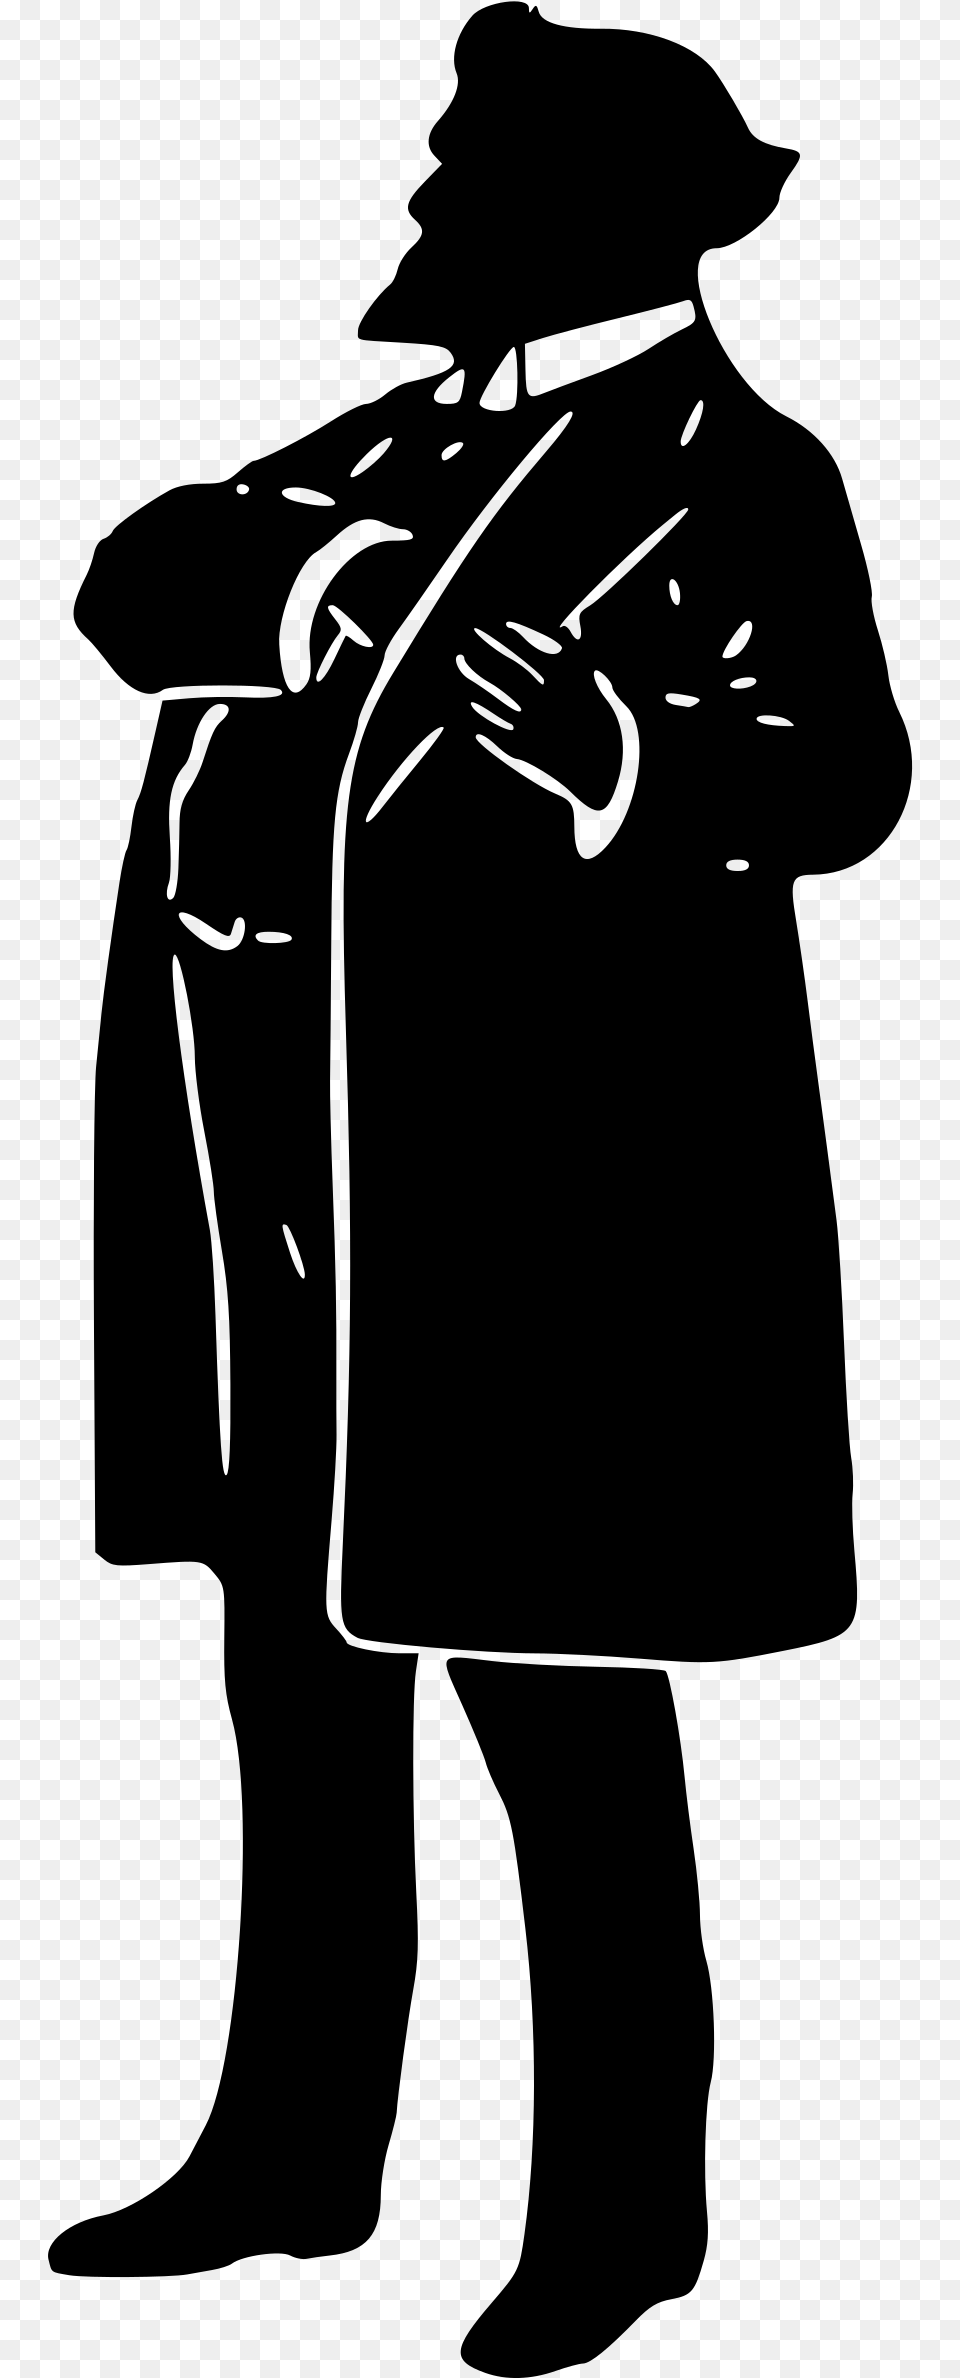 This Free Icons Design Of Gentleman Silhouette, Gray Png Image